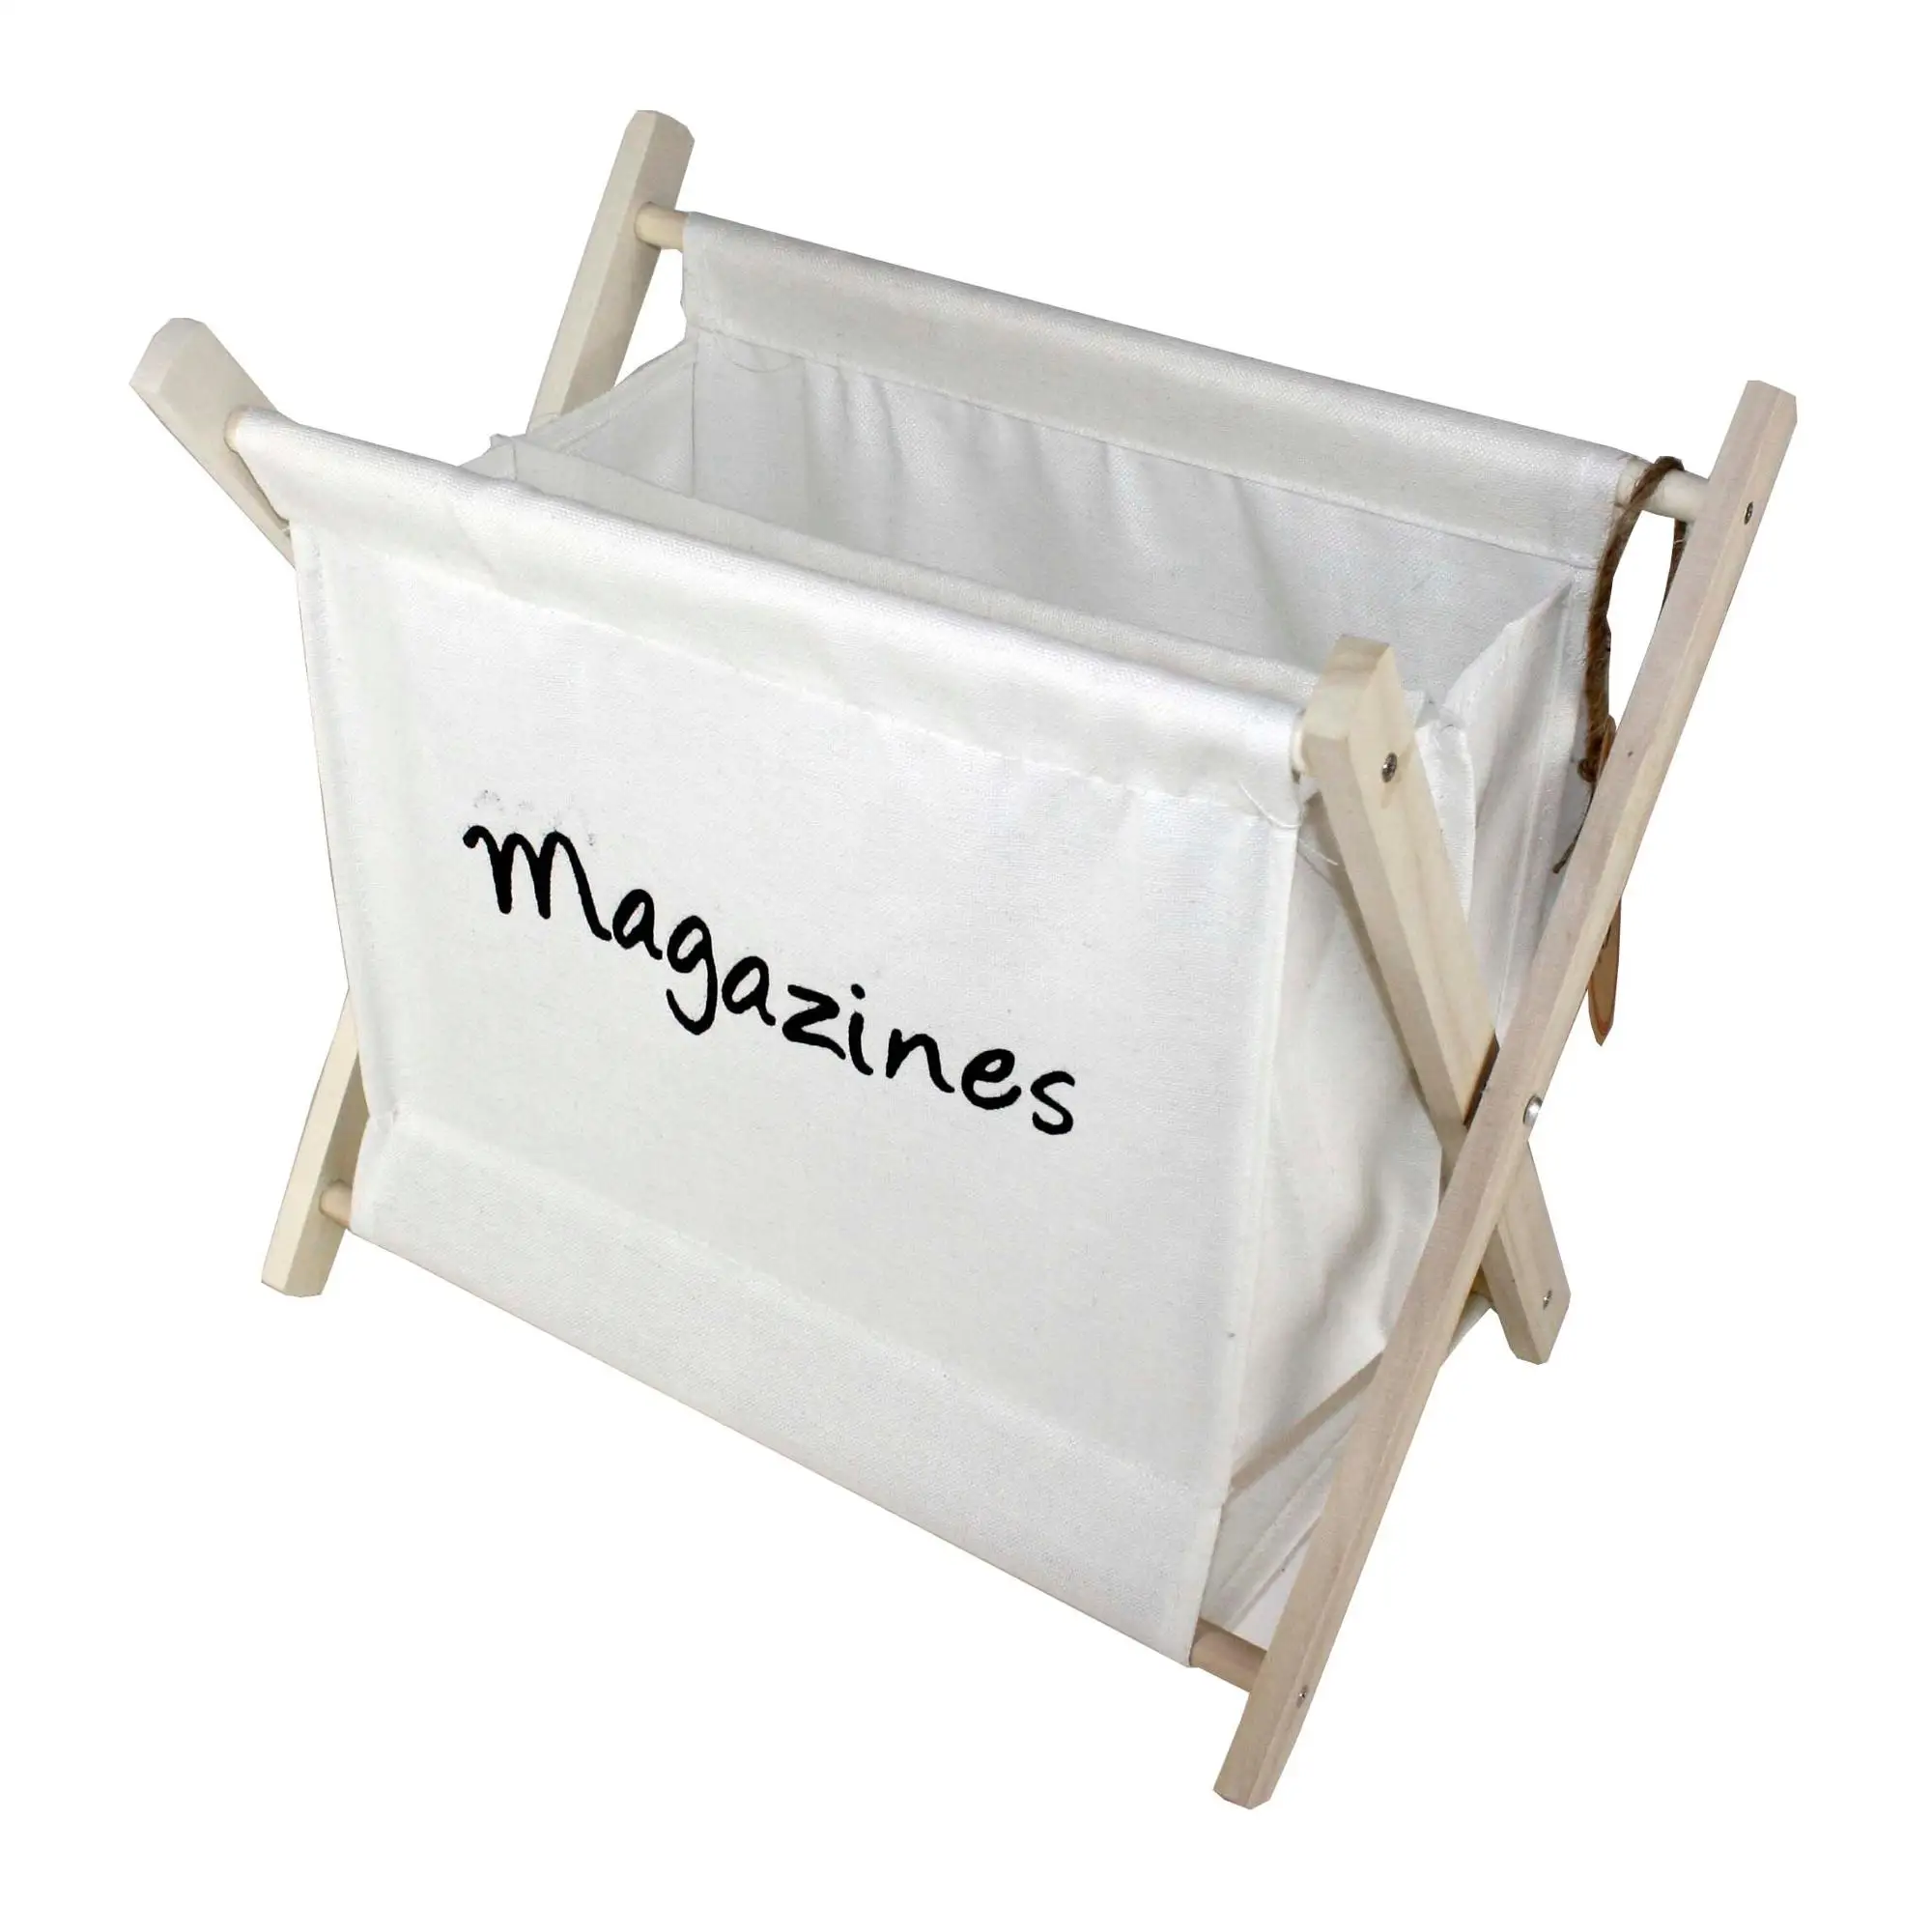 Guaranteed4Less Wooden Magazine Rack Folding Newspaper Holder Stand Remote Organiser Floor Book Off White 